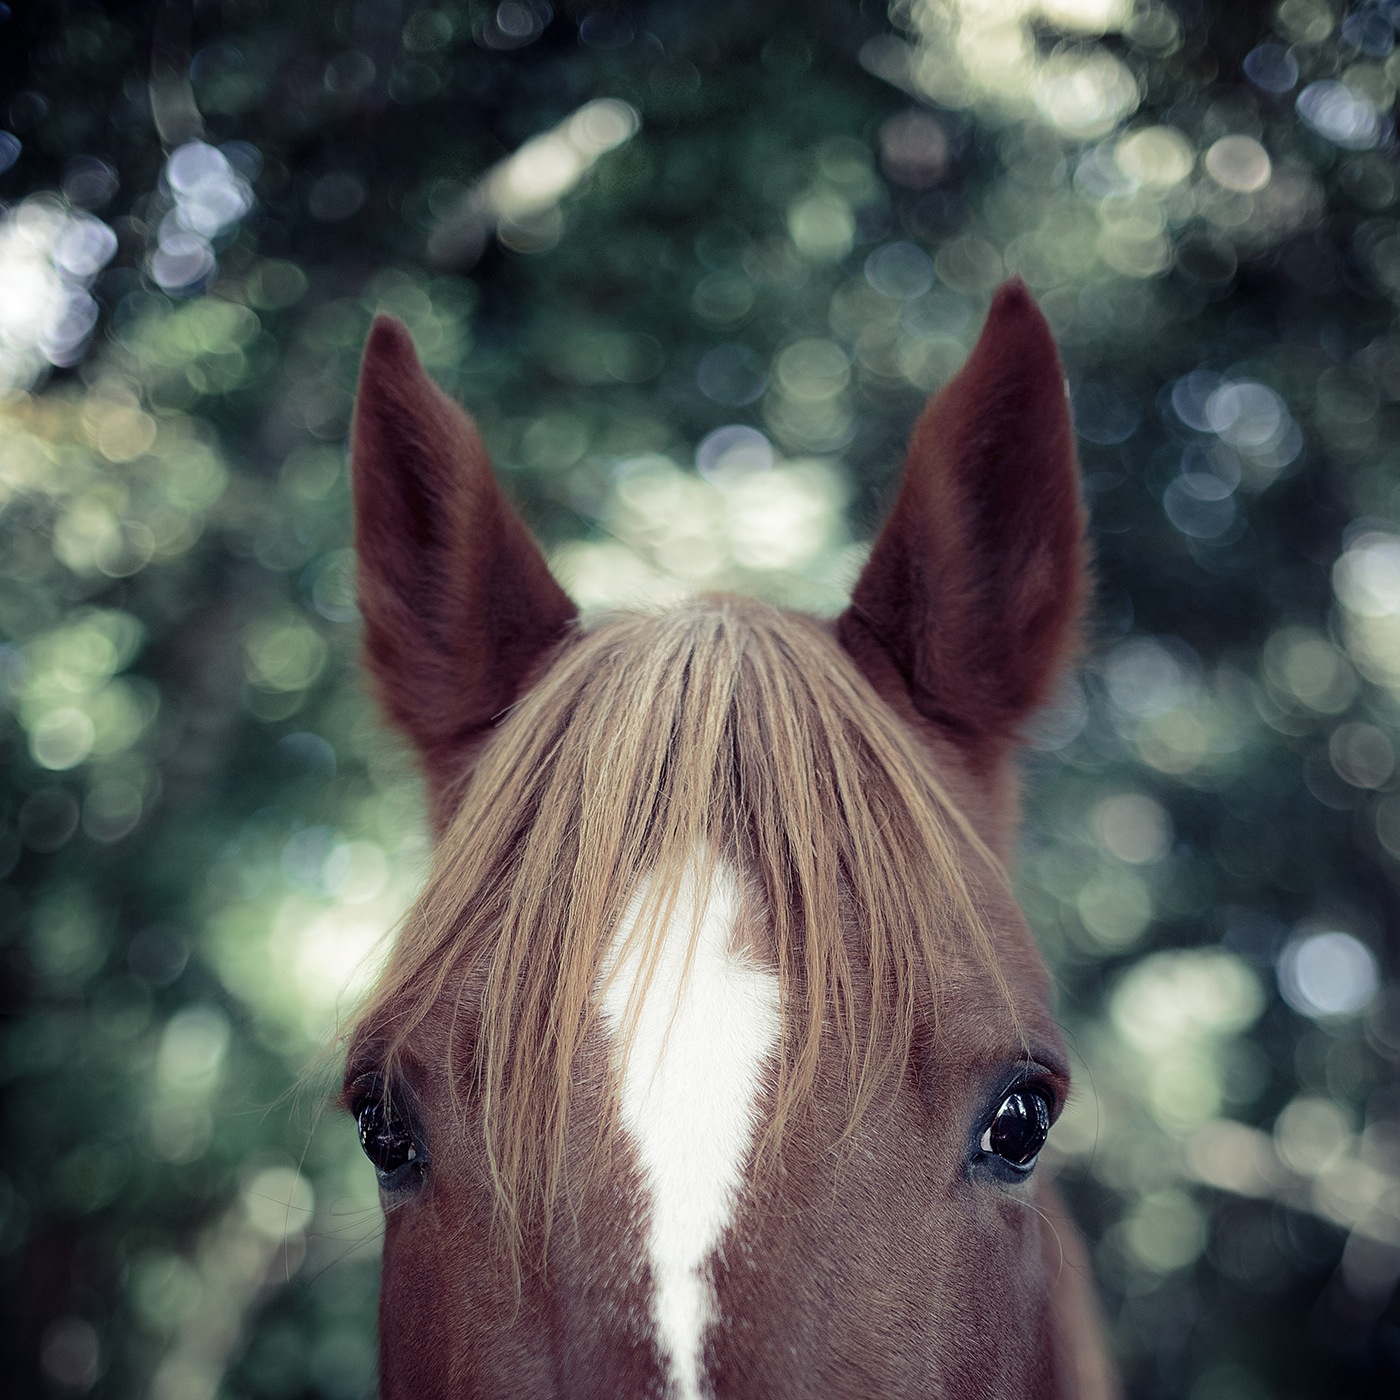 photographe-animaux-domestiques-chevaux-guillaume-heraud-02-small